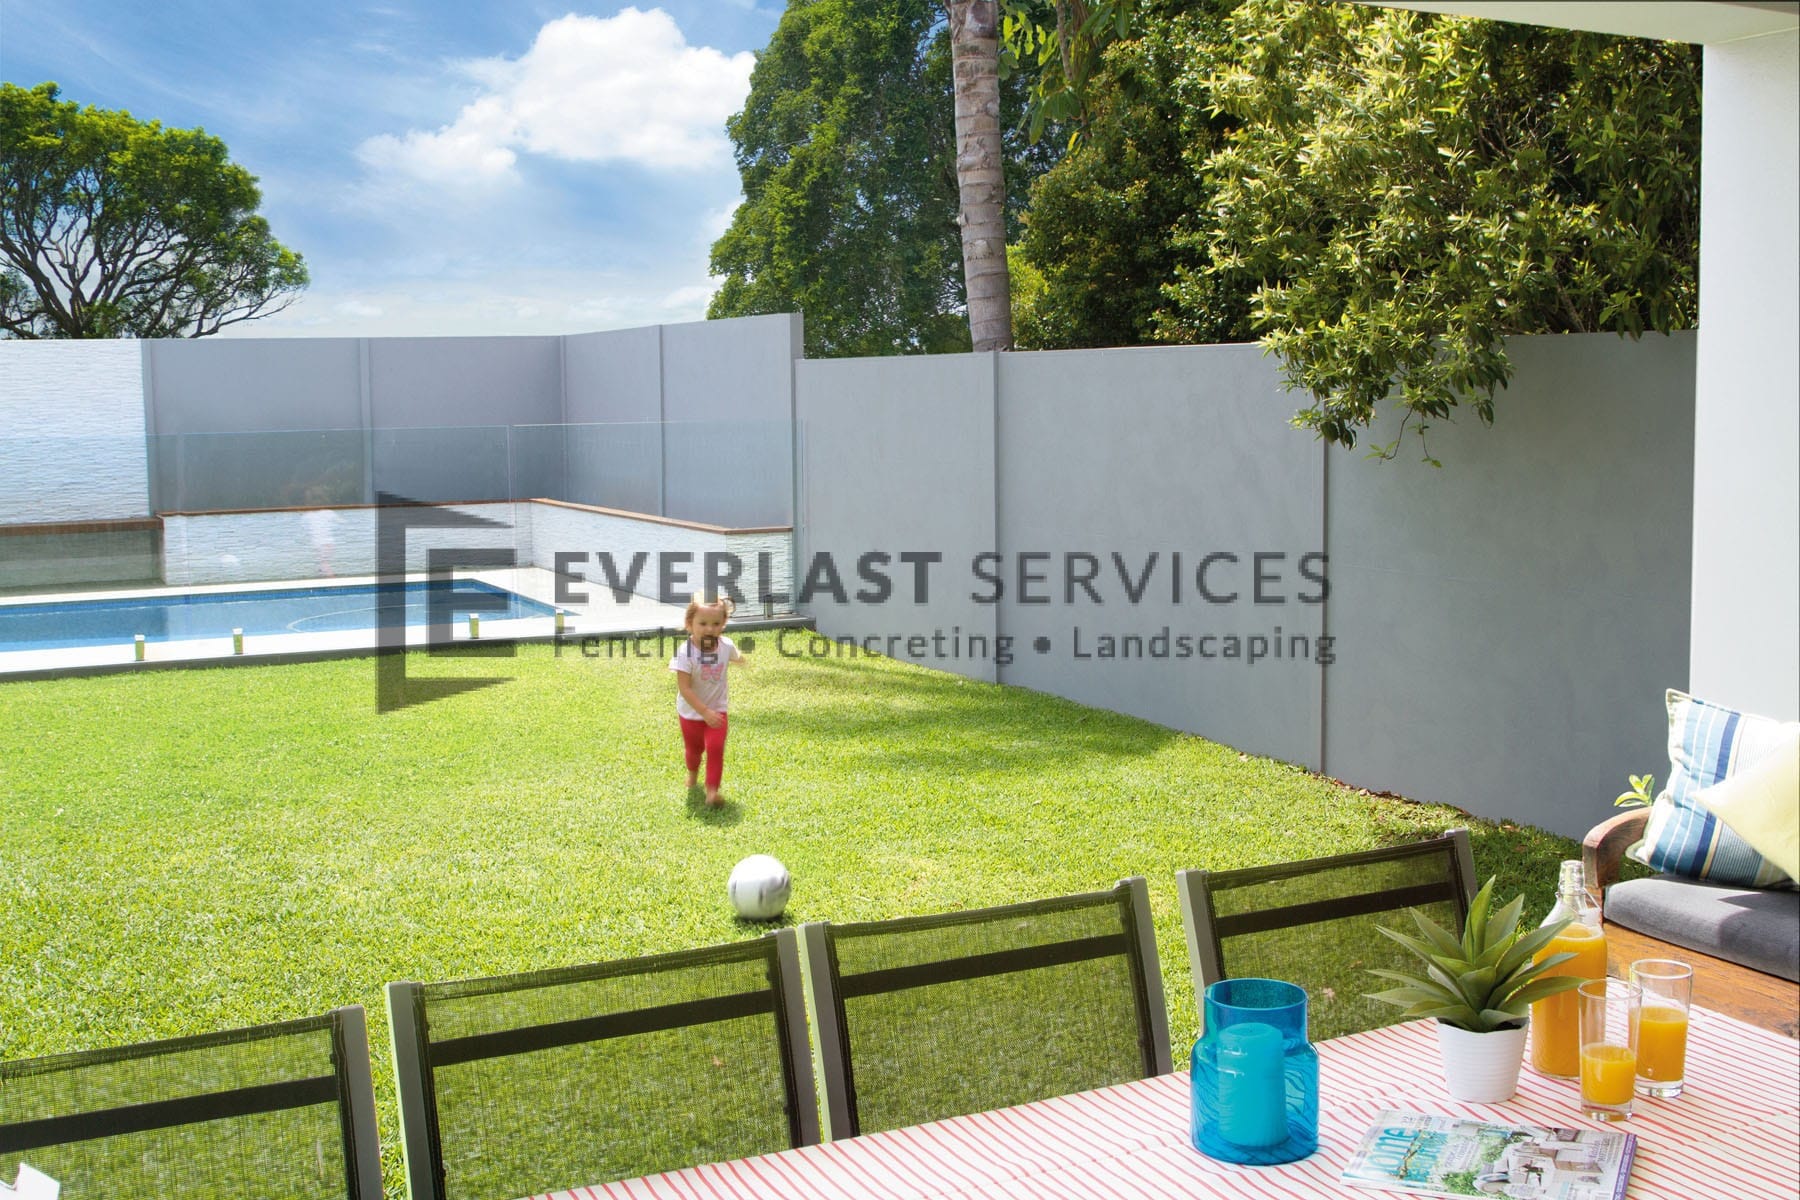 Glass Pool Fencing Back Yard Child Playing - Everlast Services